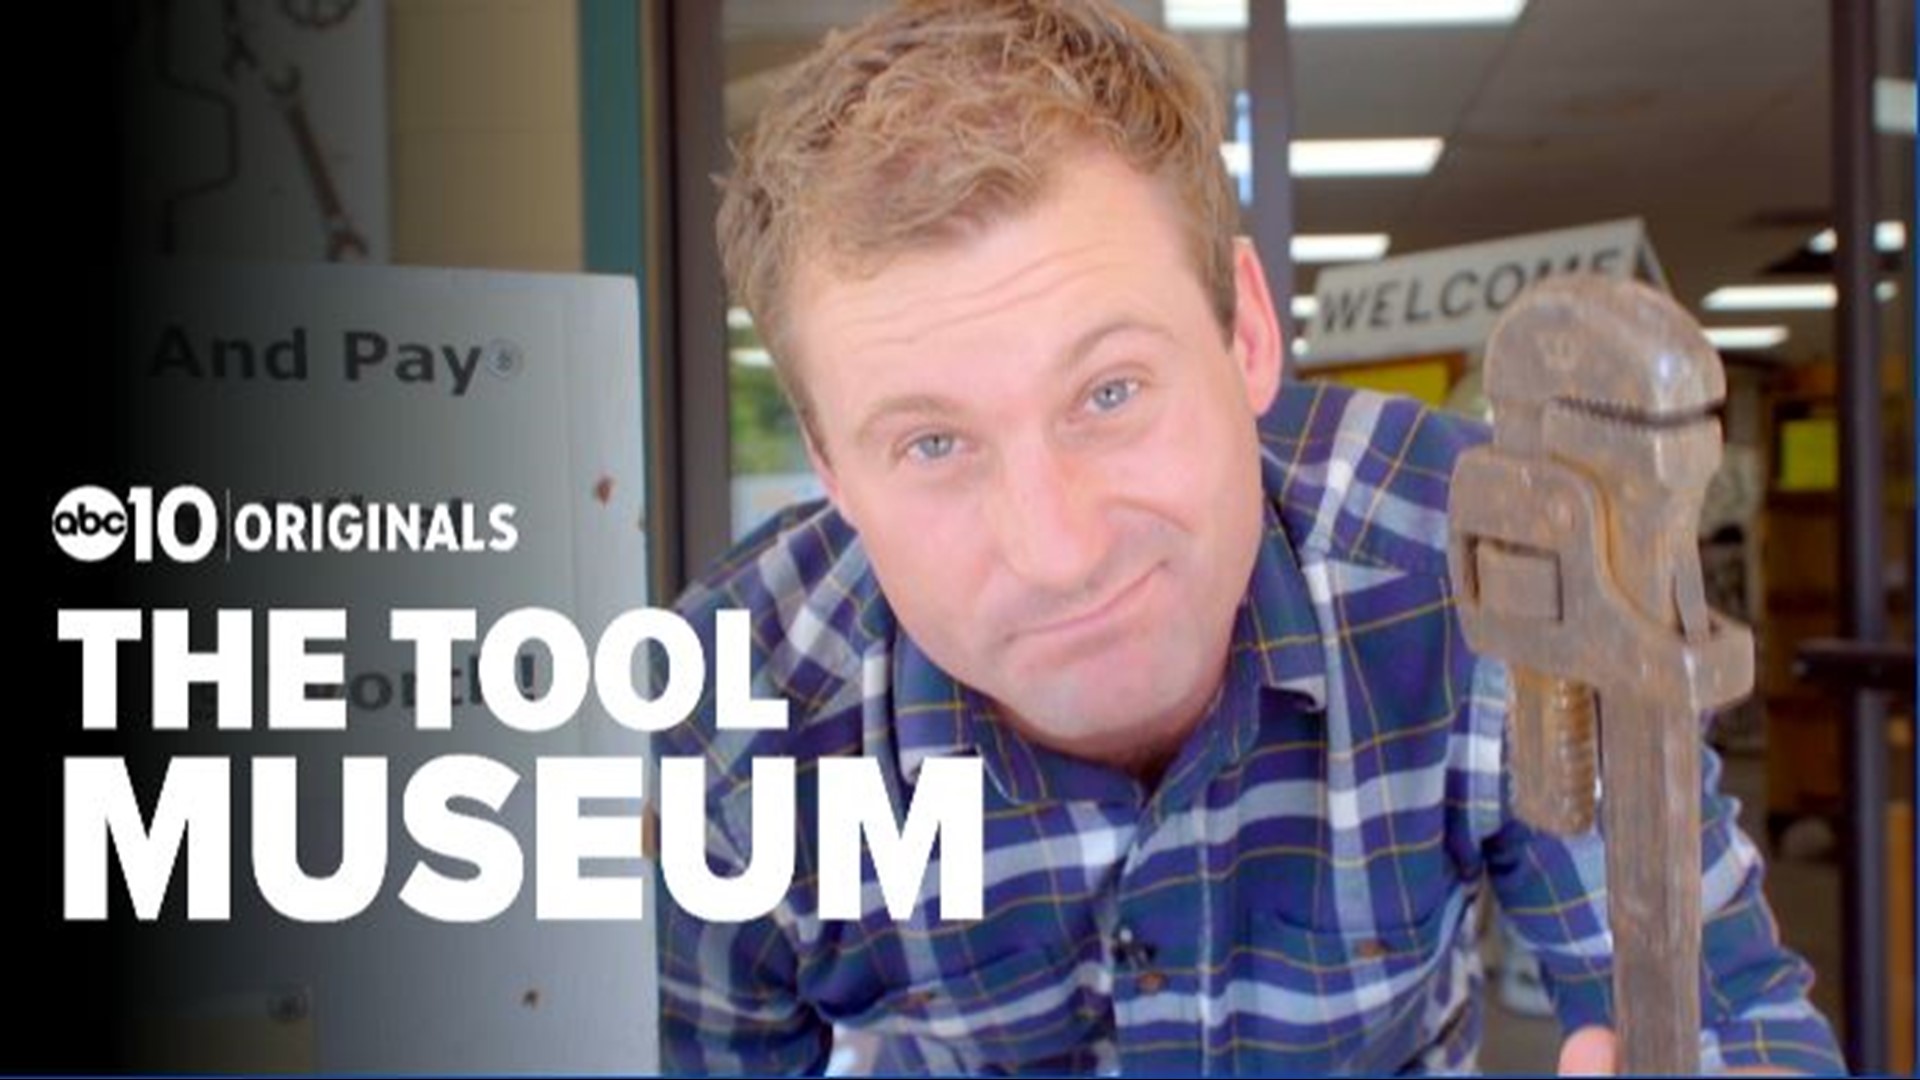 With the proper hand tool, you can build just about anything, and chances are that any hand tool that you ever could need can be found in Oroville, at Bolt's Antique Tool Museum. It's a tool-lover's paradise.